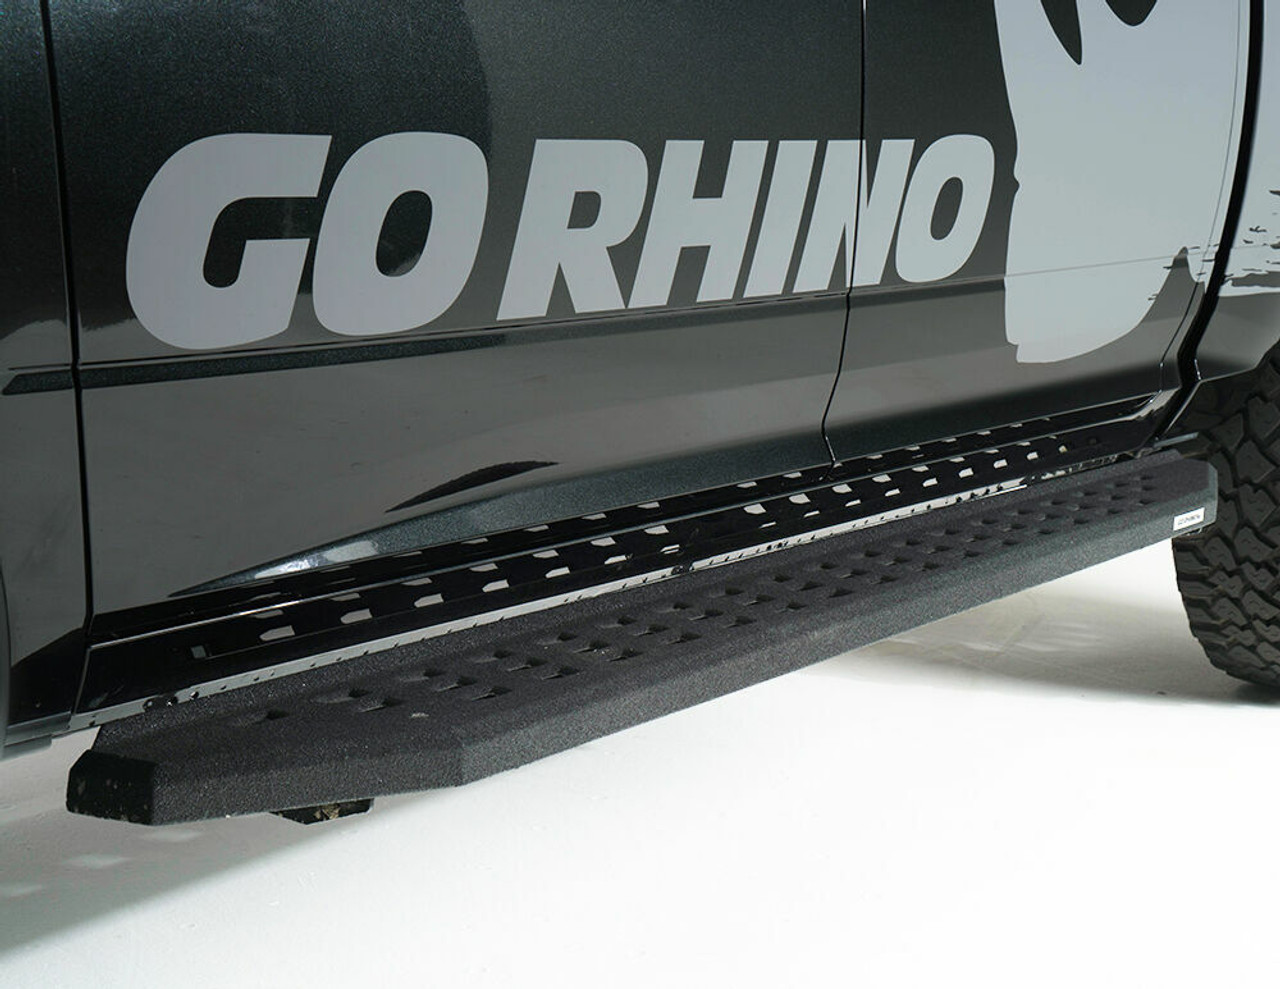 Go Rhino 69405880T Chevrolet, Silverado 1500 LD (Classic), 2014 - 2019, RB20 Running boards - Complete Kit: RB20 Running boards + Brackets, Galvanized Steel, Protective Bedliner coating, 69400080T RB20 + 6940475 RB Brackets, Classic Body Style Only